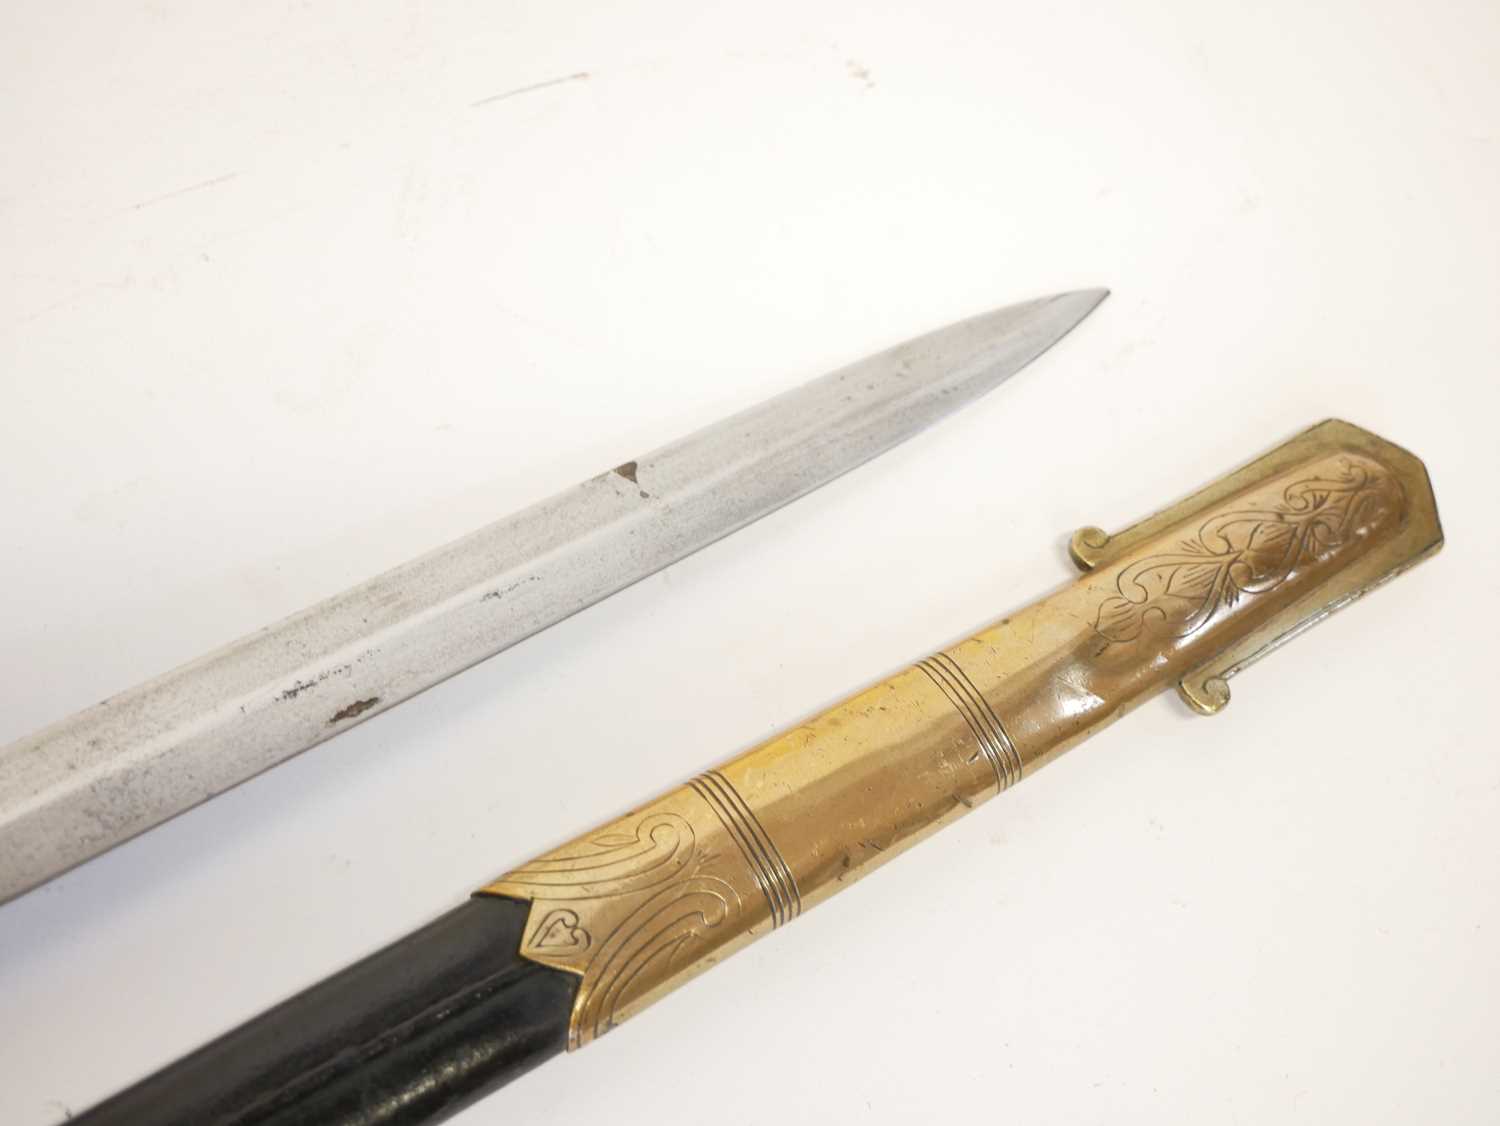 Royal Navy Petty Officer's sword, similar to an 1827 Naval sword but without the lion head pommel, - Image 15 of 16